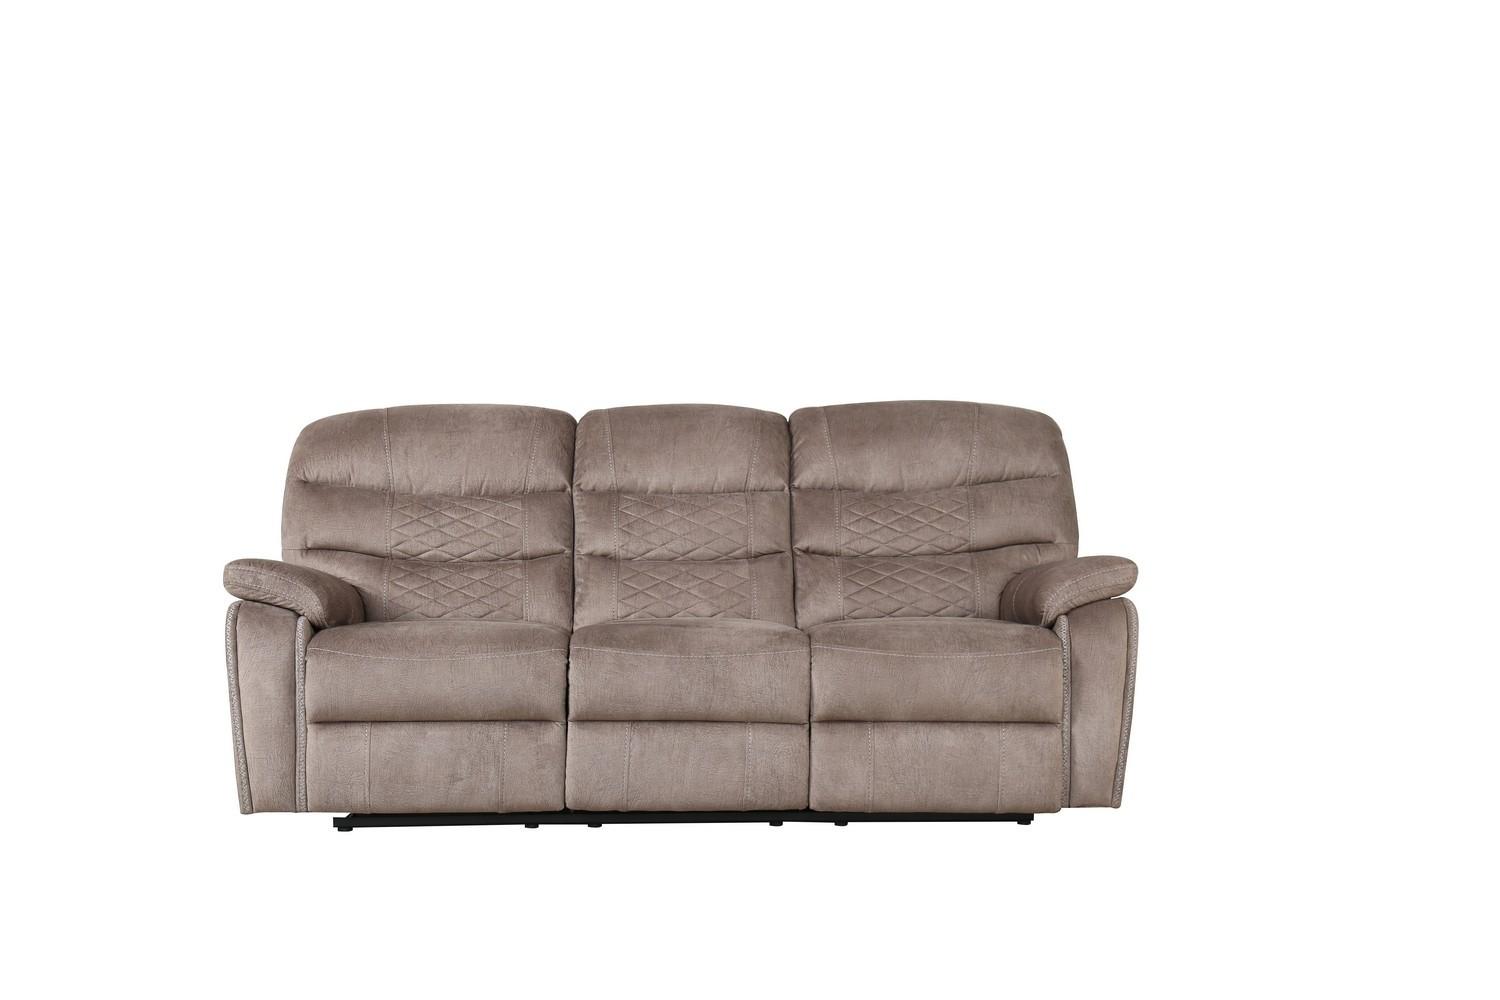 Contemporary Sofa recliner 5052 5052-LT-BROWN-S in Gray leather Air